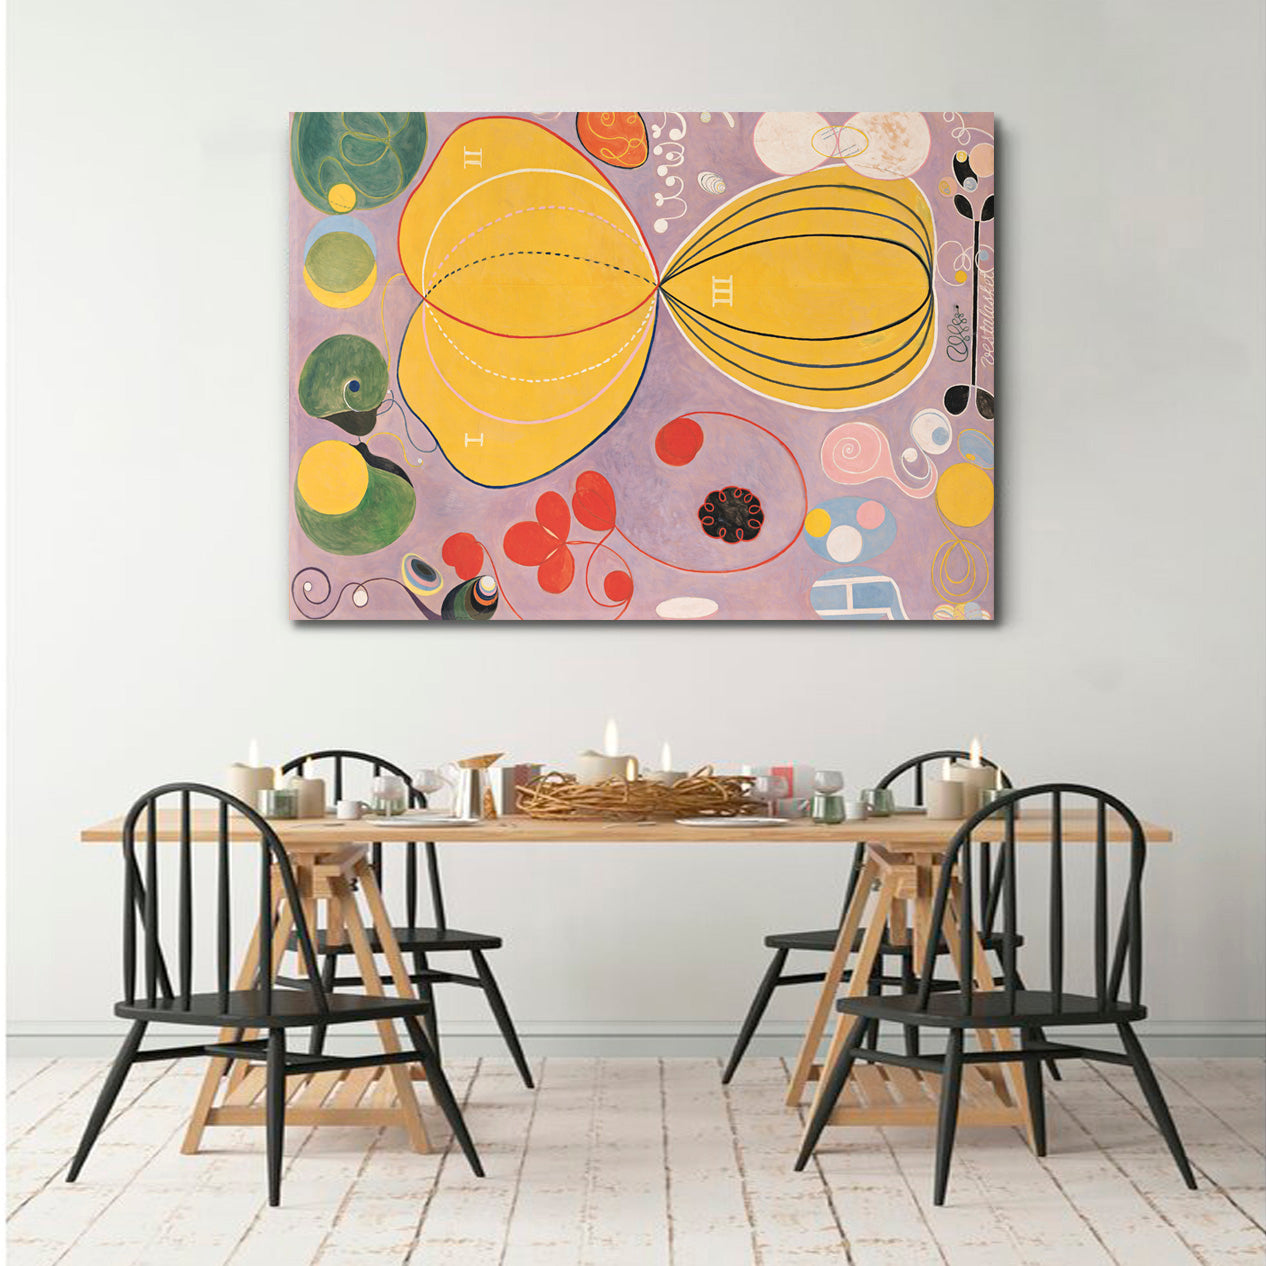 Abstract Impressionism Inspired by Hilma Af Klint Vivid Modernist Abstract Art Print Artesty   